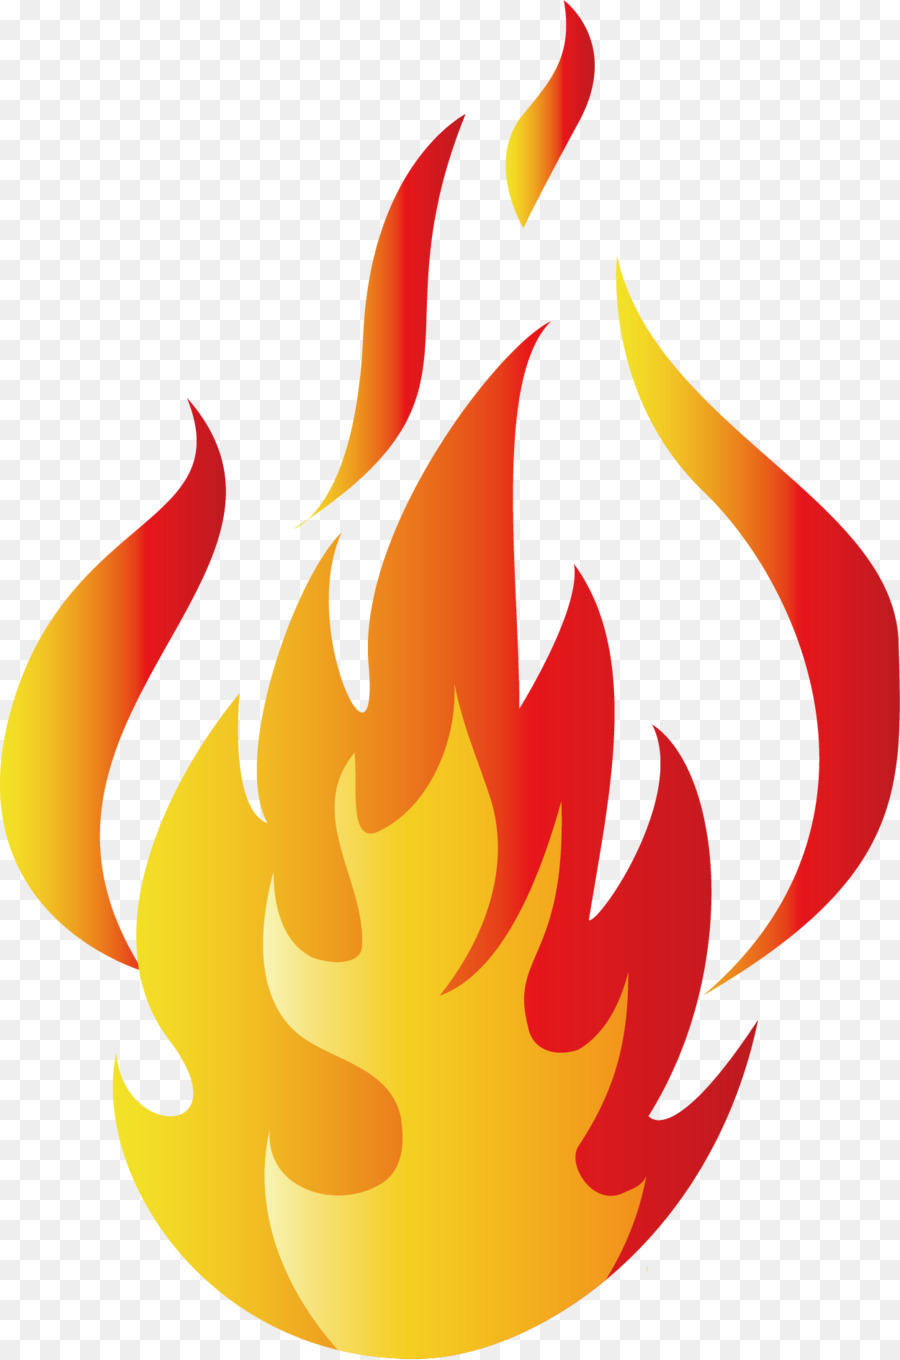 Cool flame Cartoon - Flame cartoon png download - 1250*1887 - Free Transparent Flame png Download.